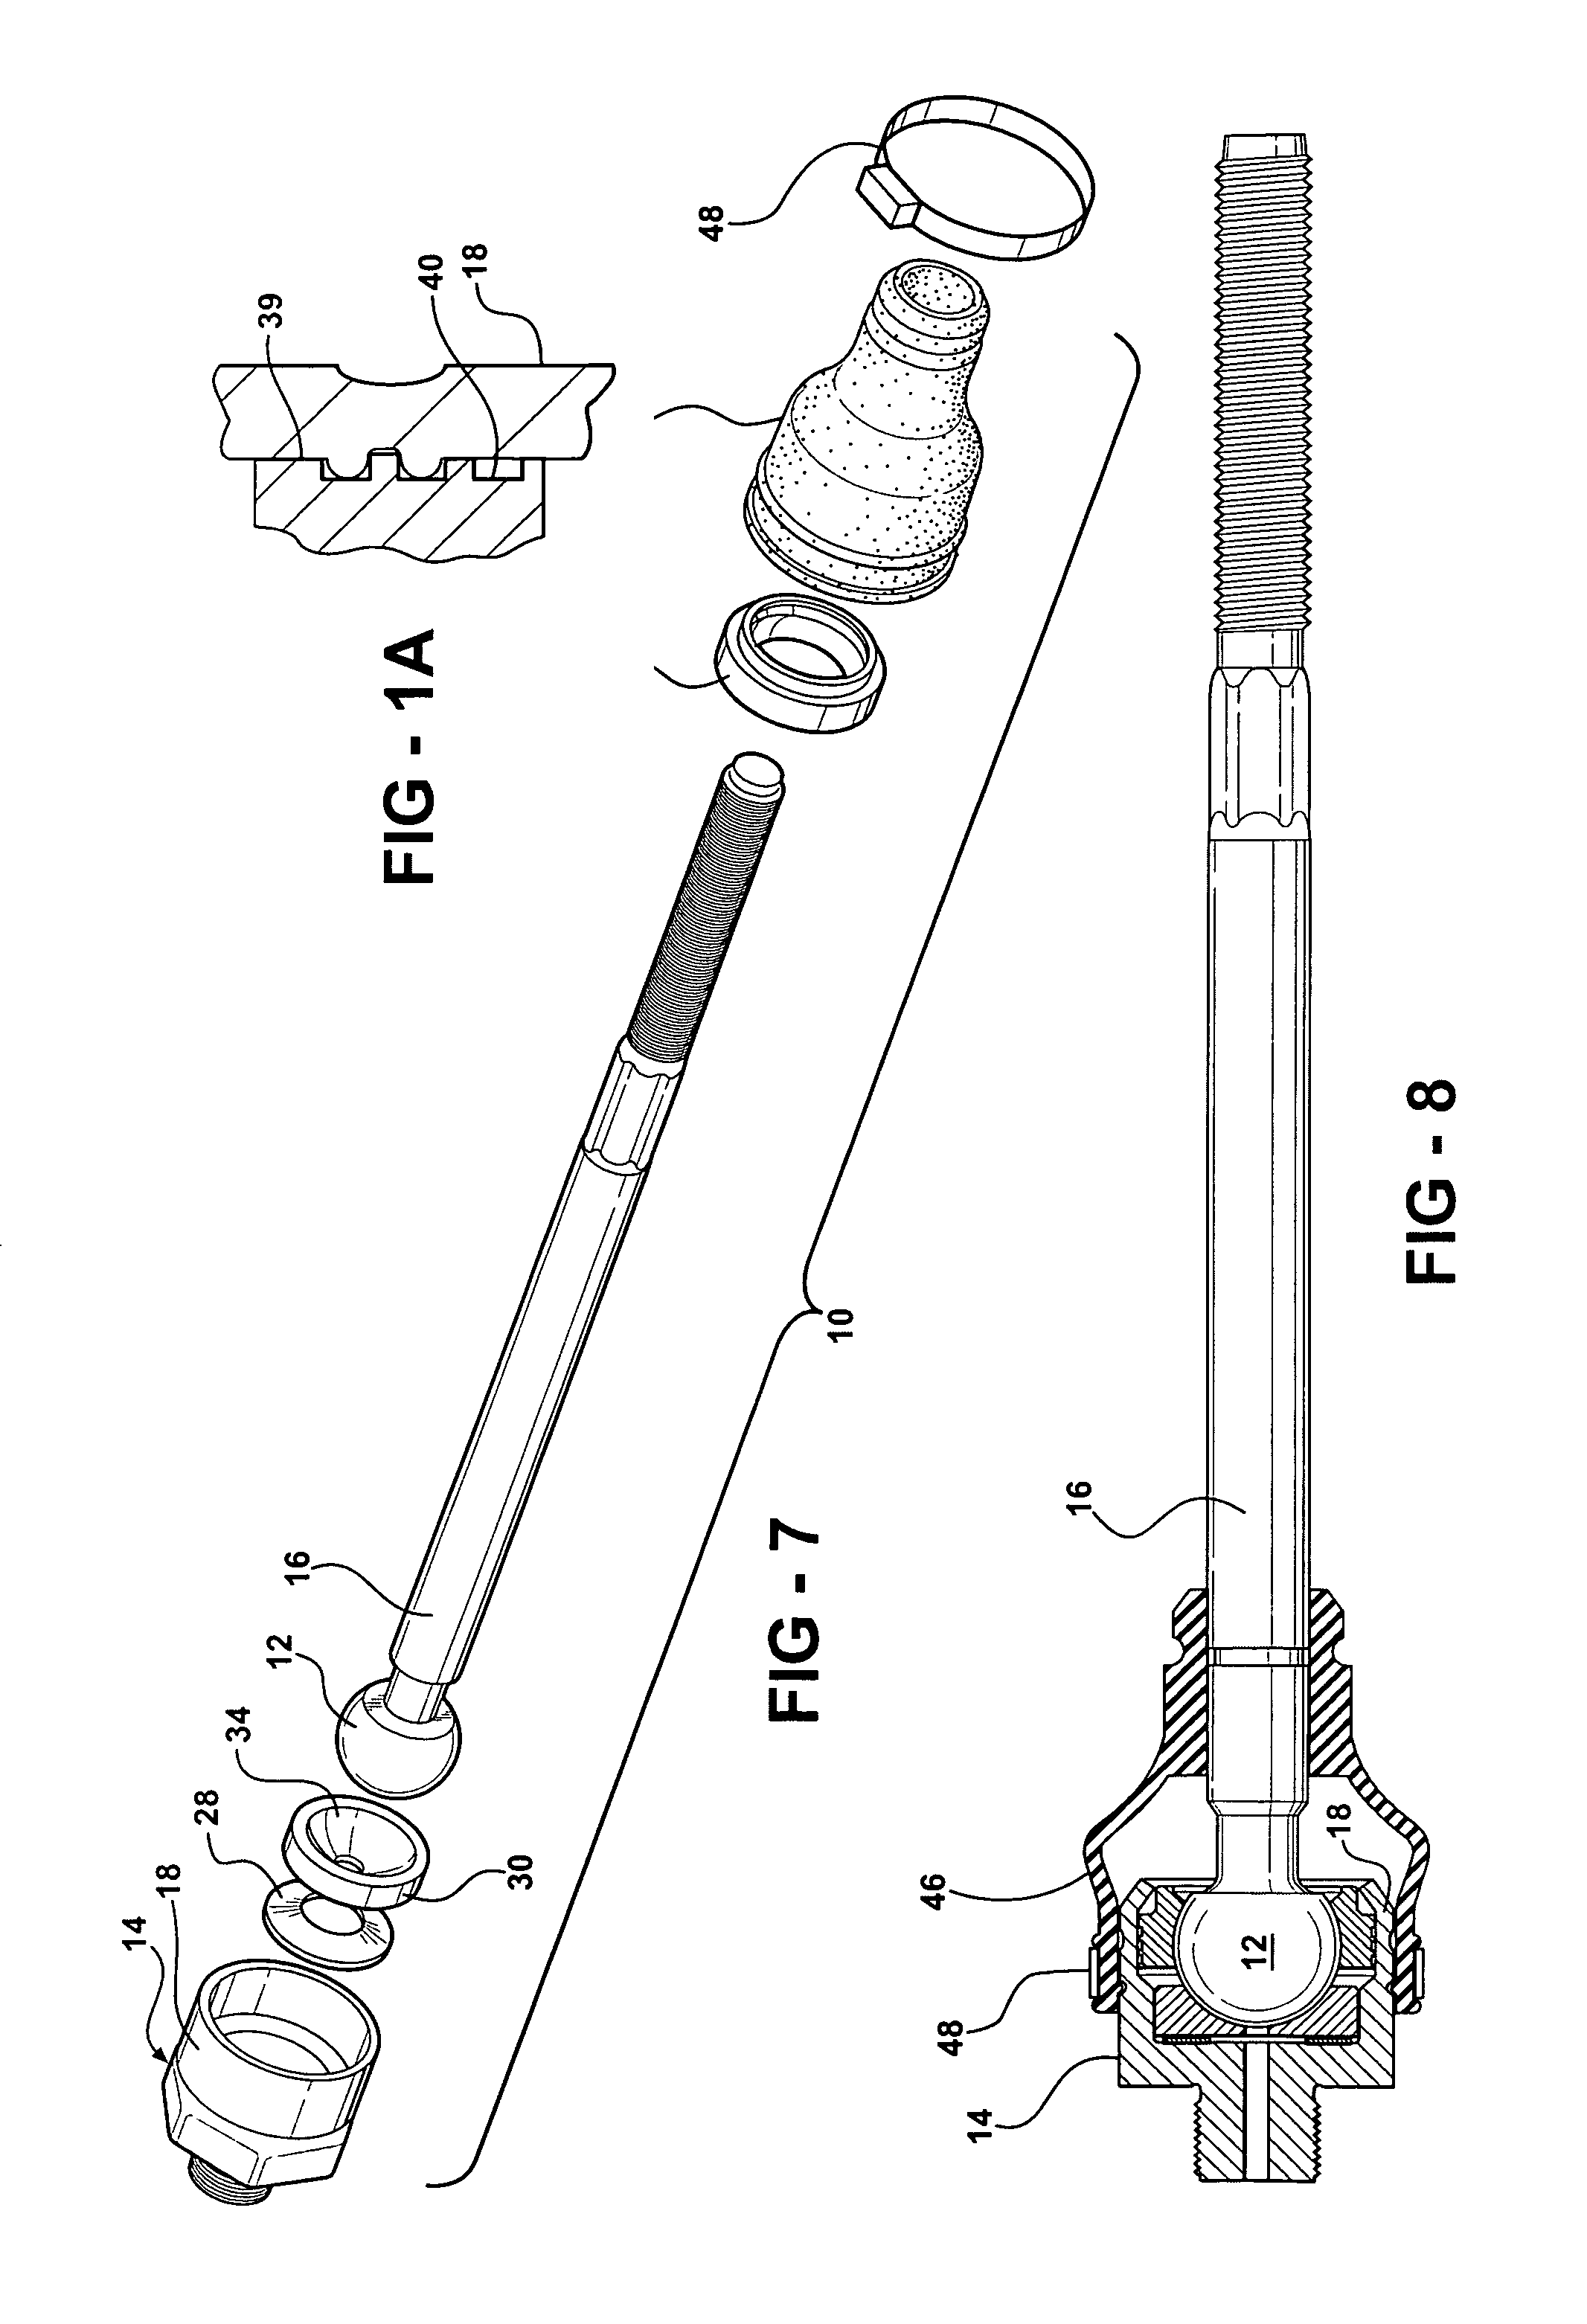 Method of setting the pre-load for a ball socket joint